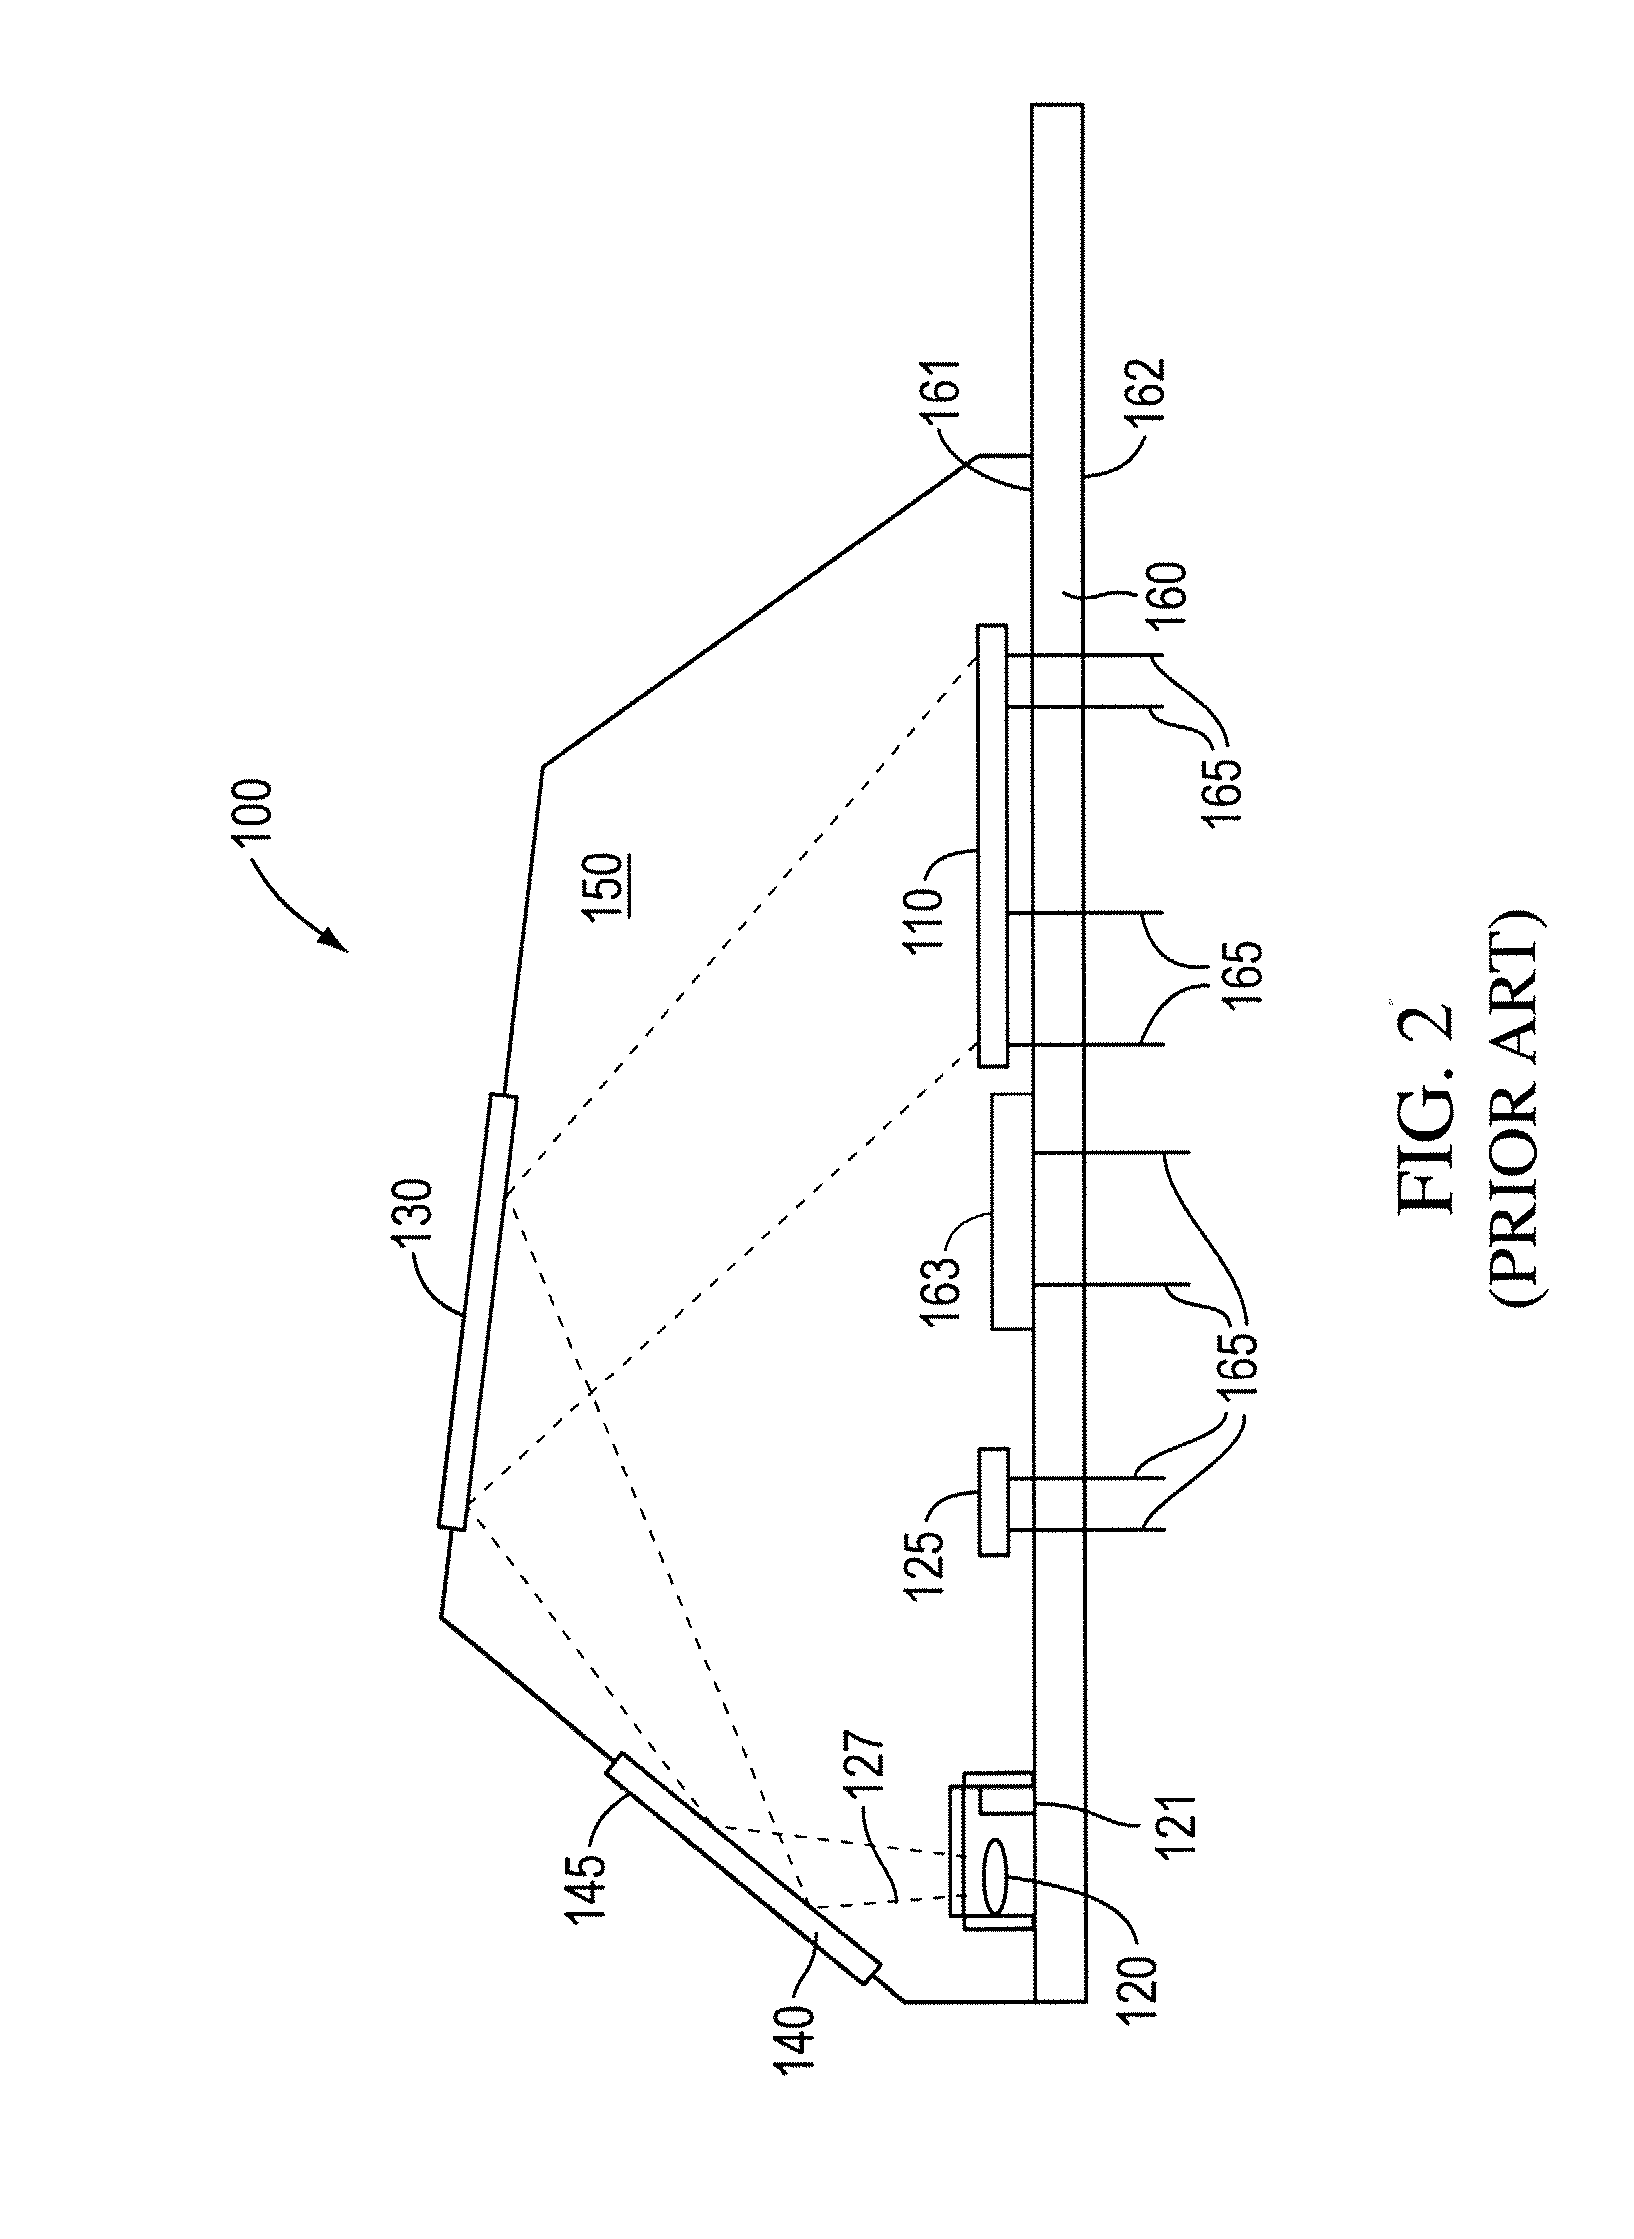 Method and apparatus for a liquid chemical concentration analysis system